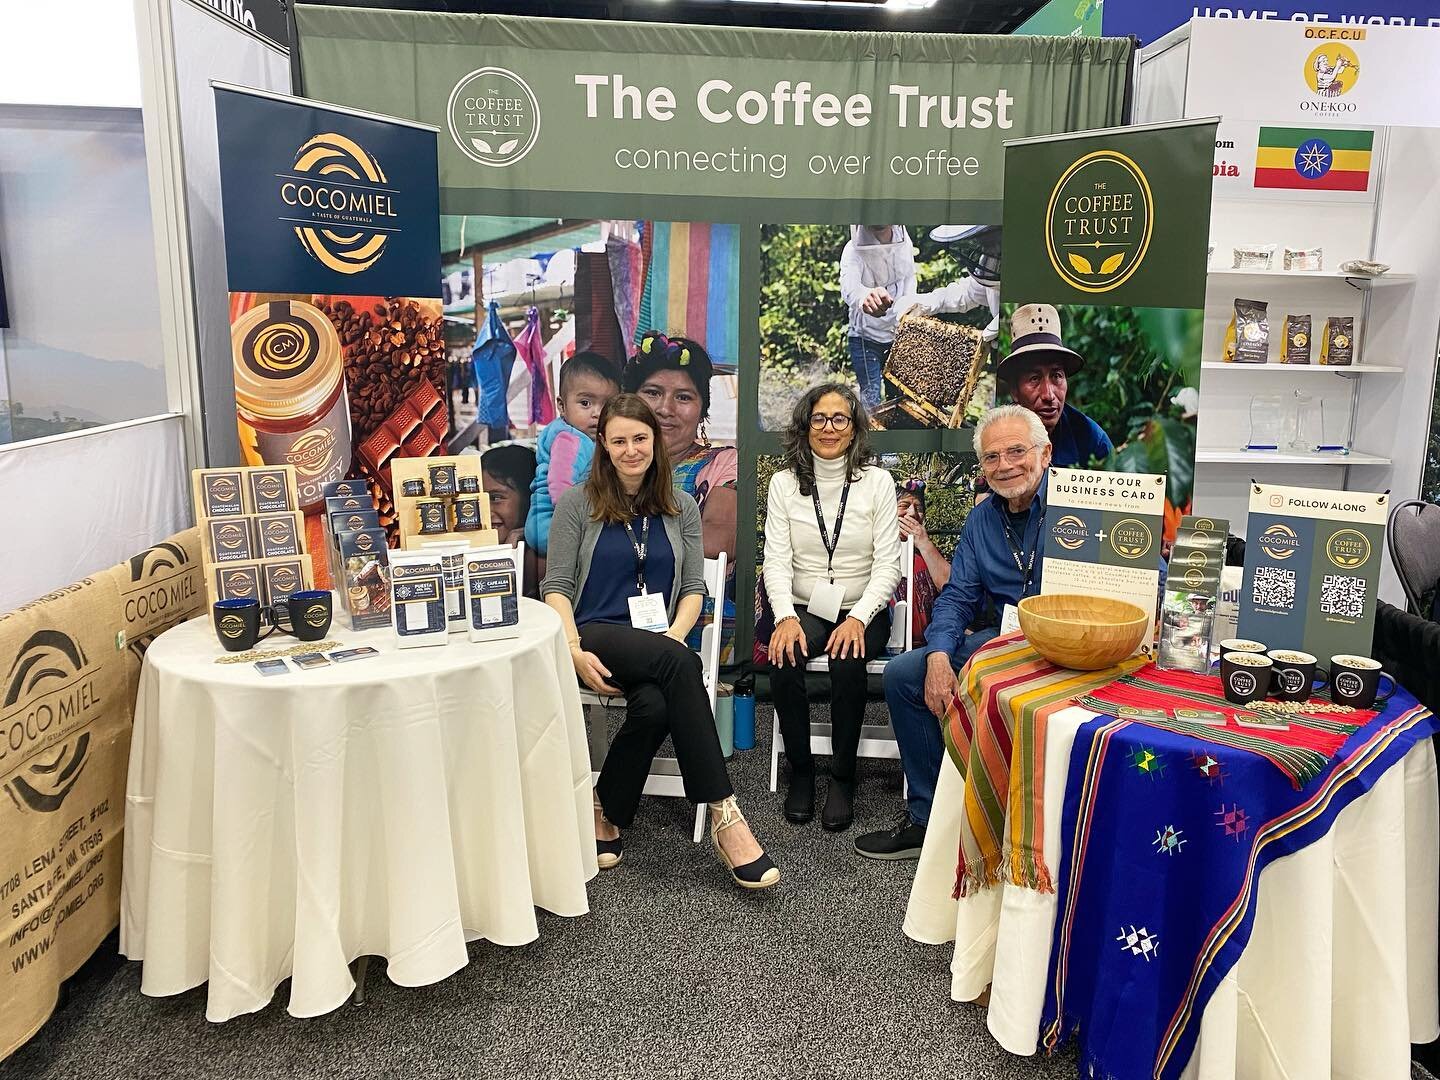 We had an amazing time at the Specialty Coffee Expo in Portland last weekend! What a treat to see so many friends and partners new and old. Thanks to everyone who stopped by our booth! #CoffeeExpo2023

@cocomielproducts 
@deansbeanscoffee 
@longbotto